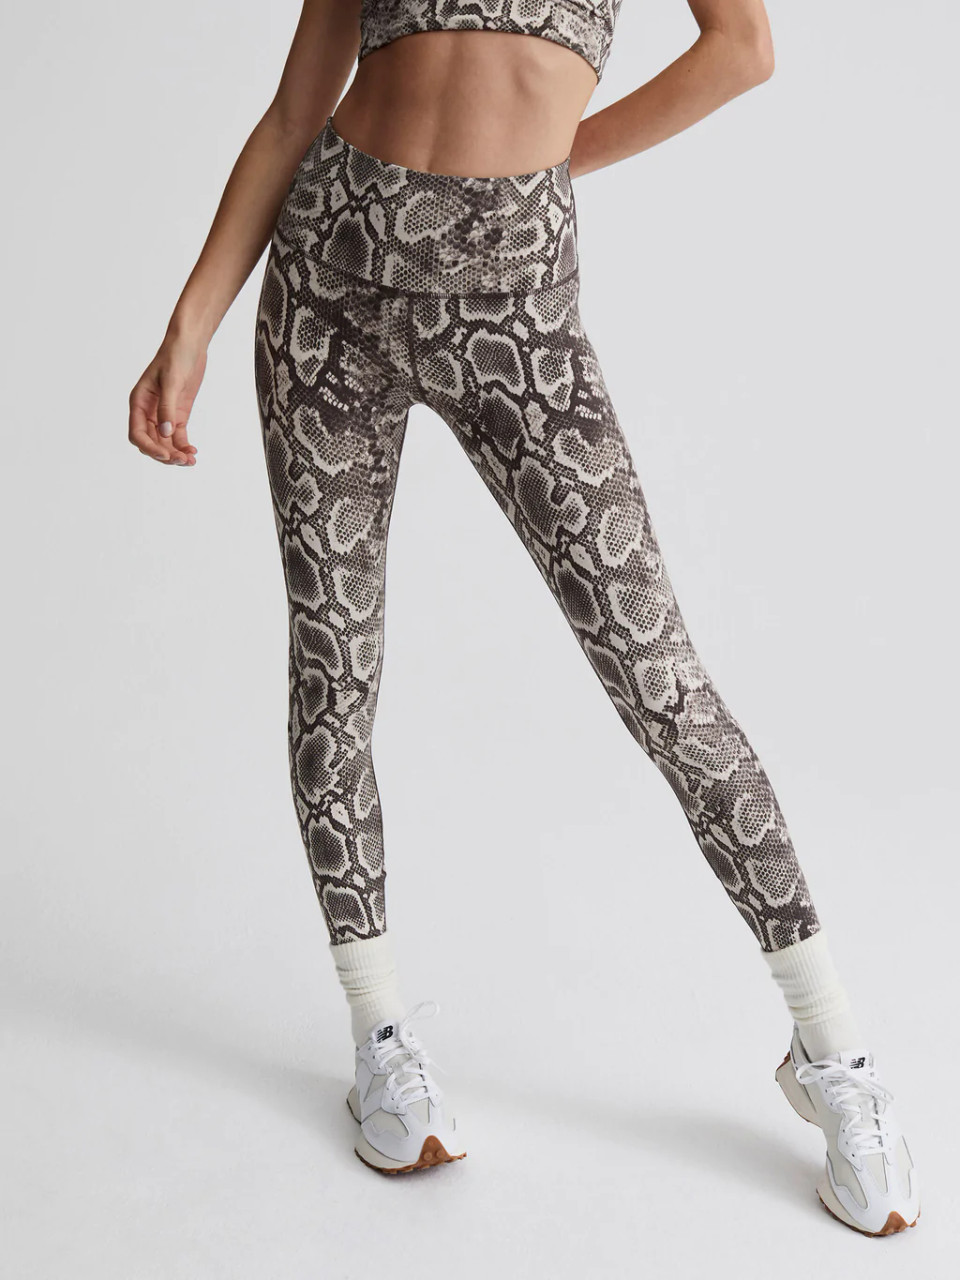 Printed Leggings High Waisted Black and Grey Color with Snake Skin